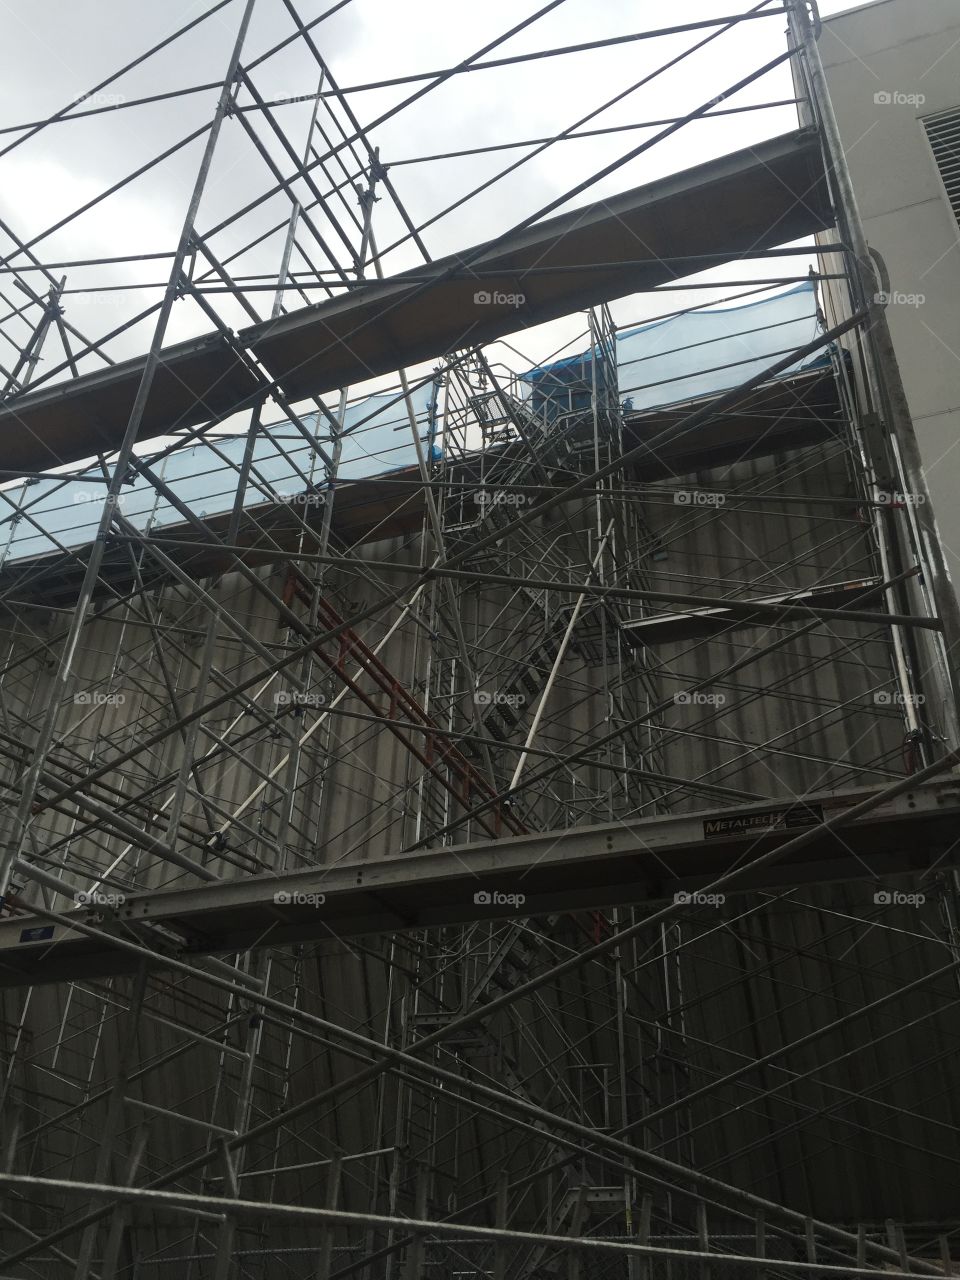 Scaffold for construction workers